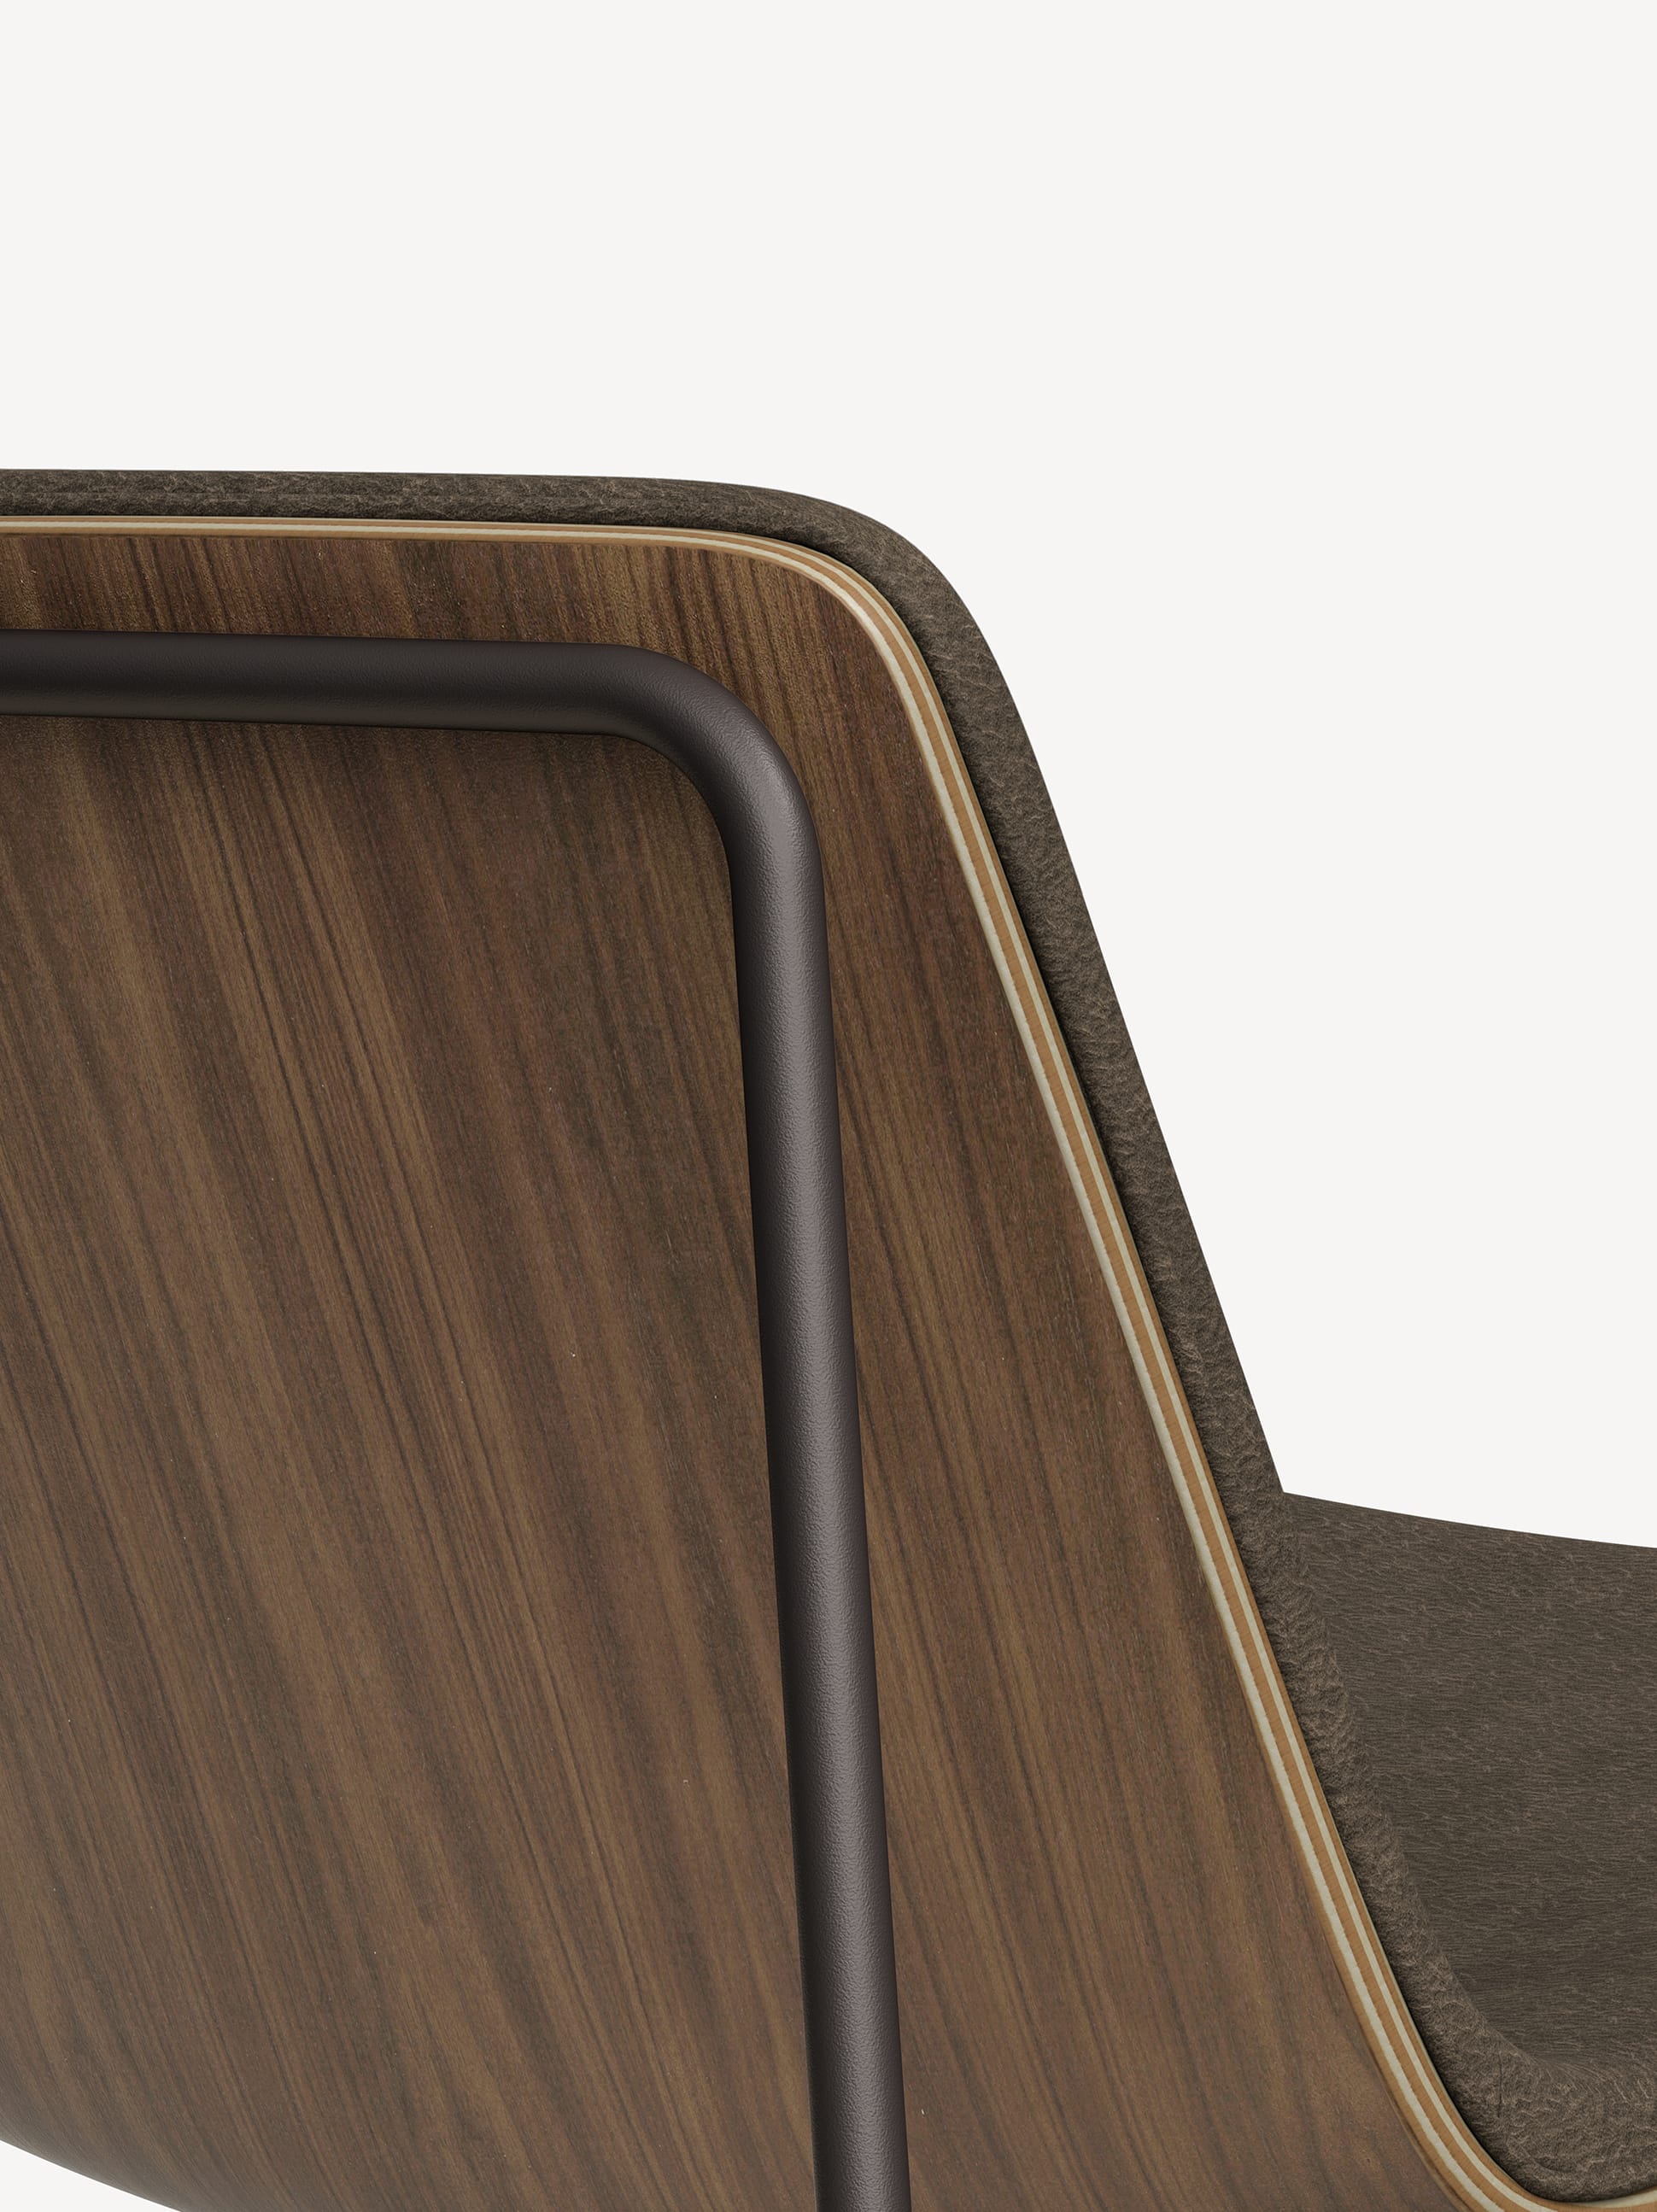 Detail of the back of the vicinity lounge chair with a black frame, brown wood veneer shell back and brown upholstered front.